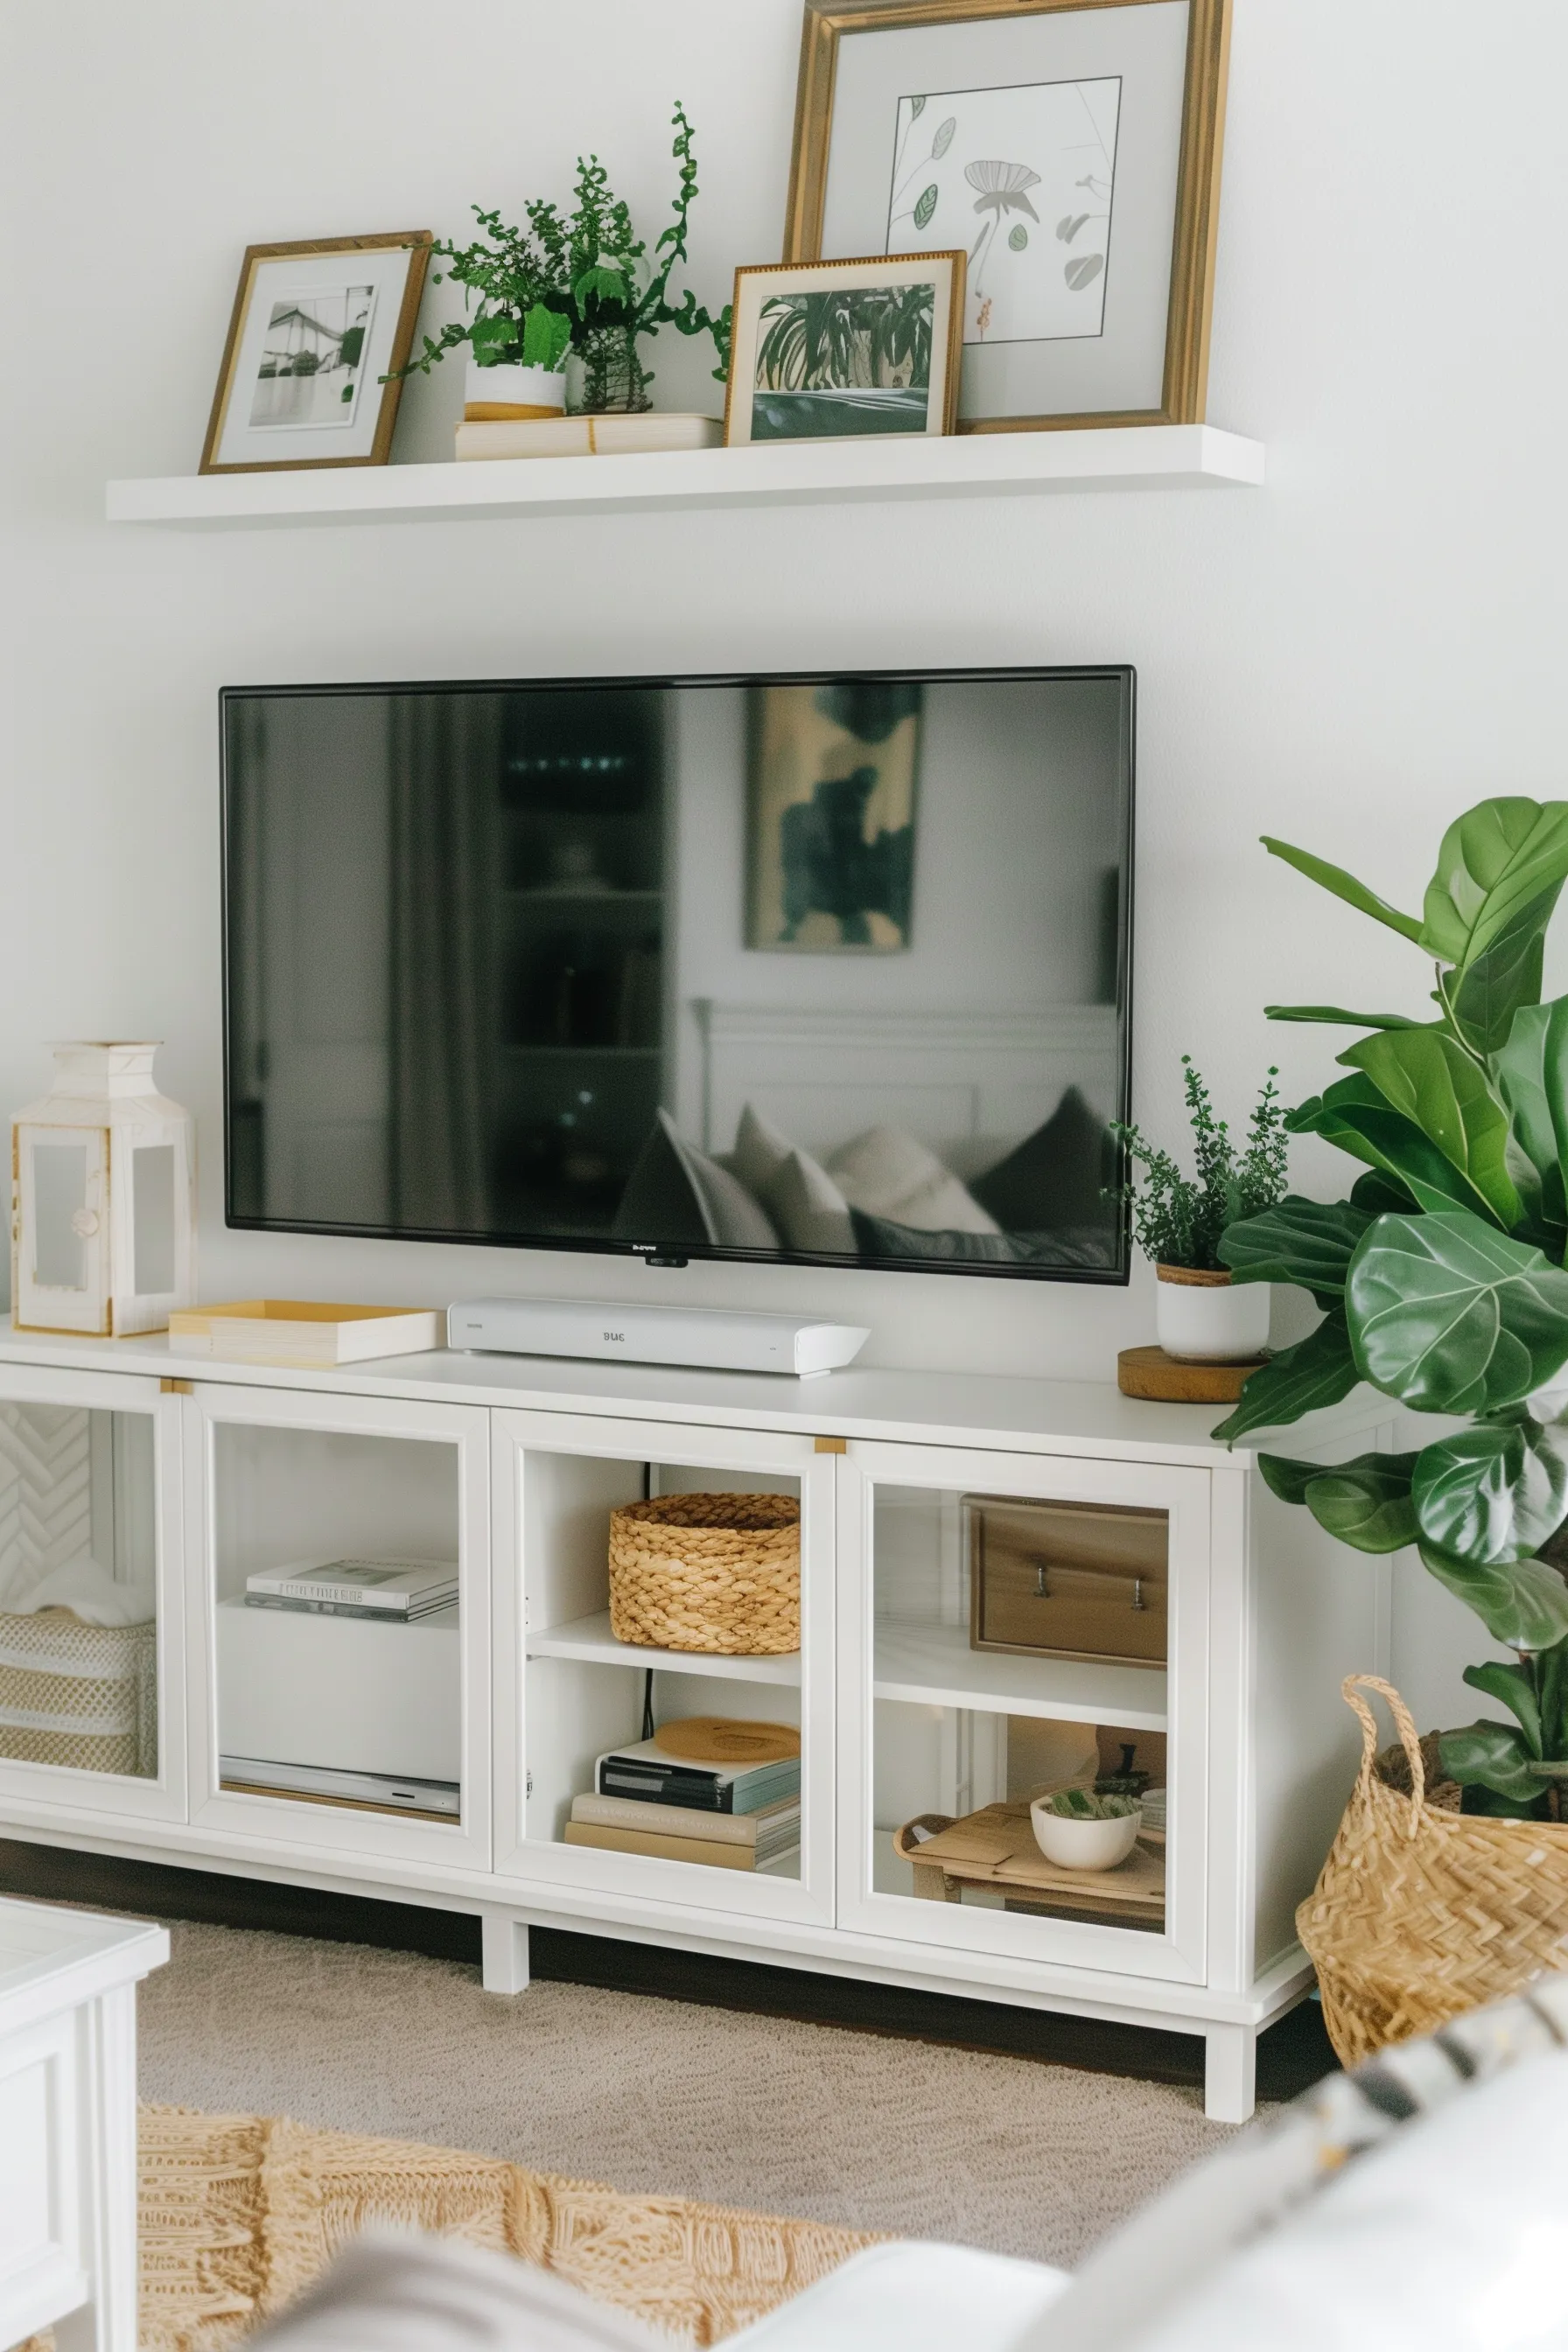 how to decorate around a tv on the wall